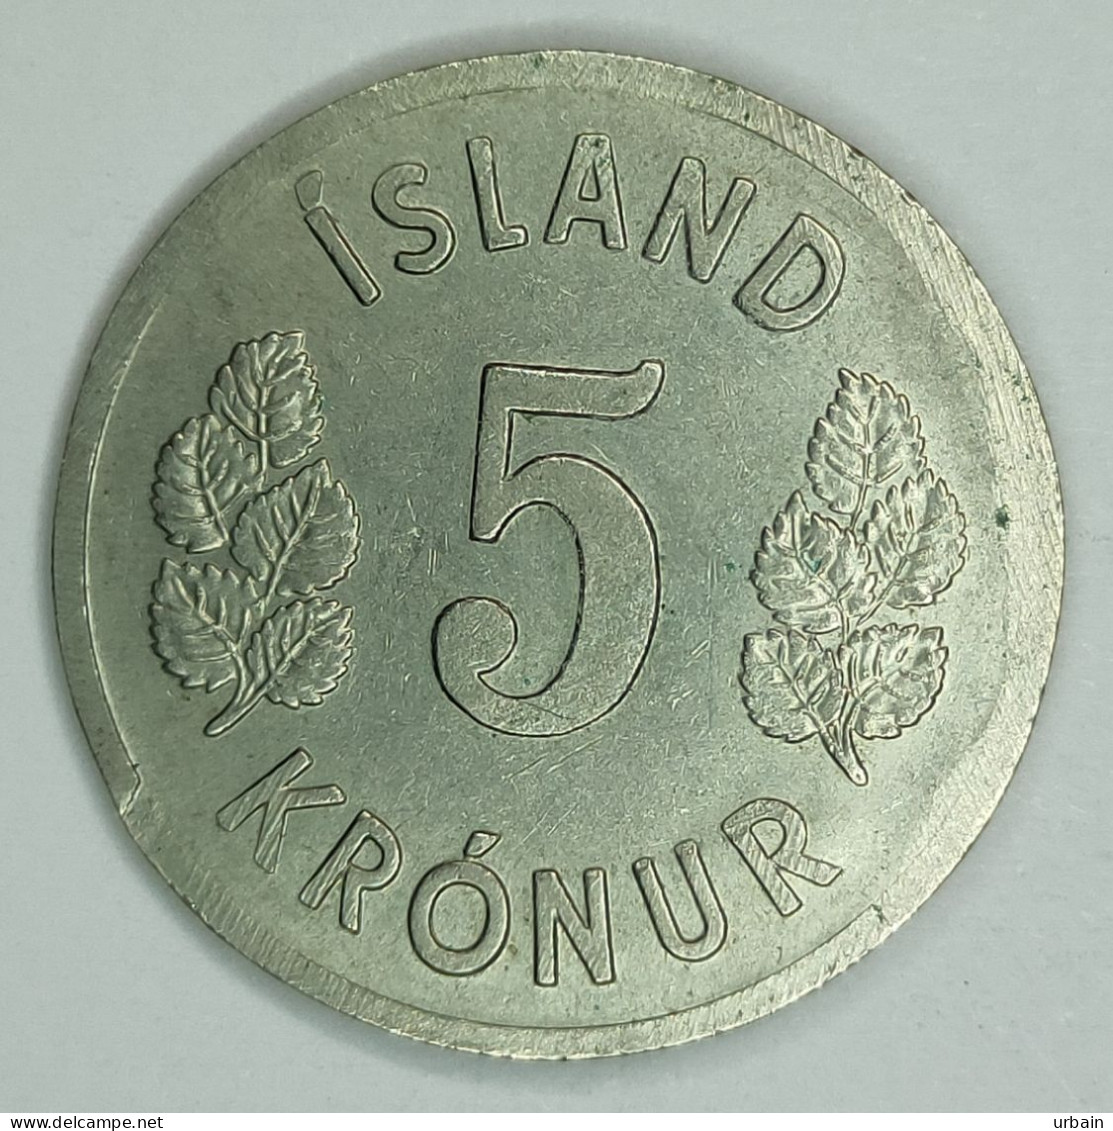 2x Coins - ICELAND - Republic Of Iceland (1944 - 1980) - Iceland